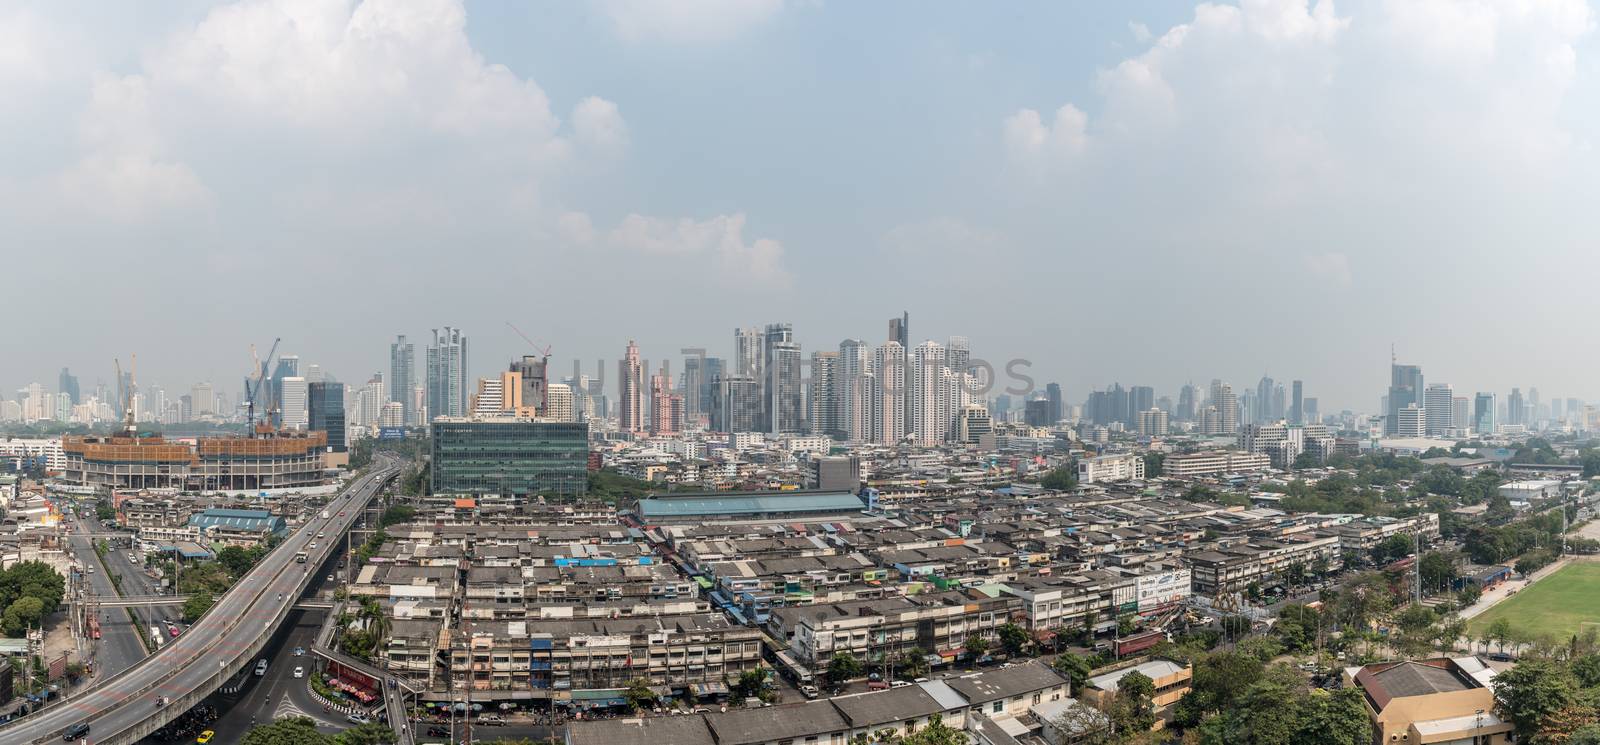 Bangkok, Thailand - January 31, 2019 : Cityscape of Bangkok city with smog PM2.5 dust exceed the standard value of Bangkok city with bad weather air pollution cause poor visibility and health hazards